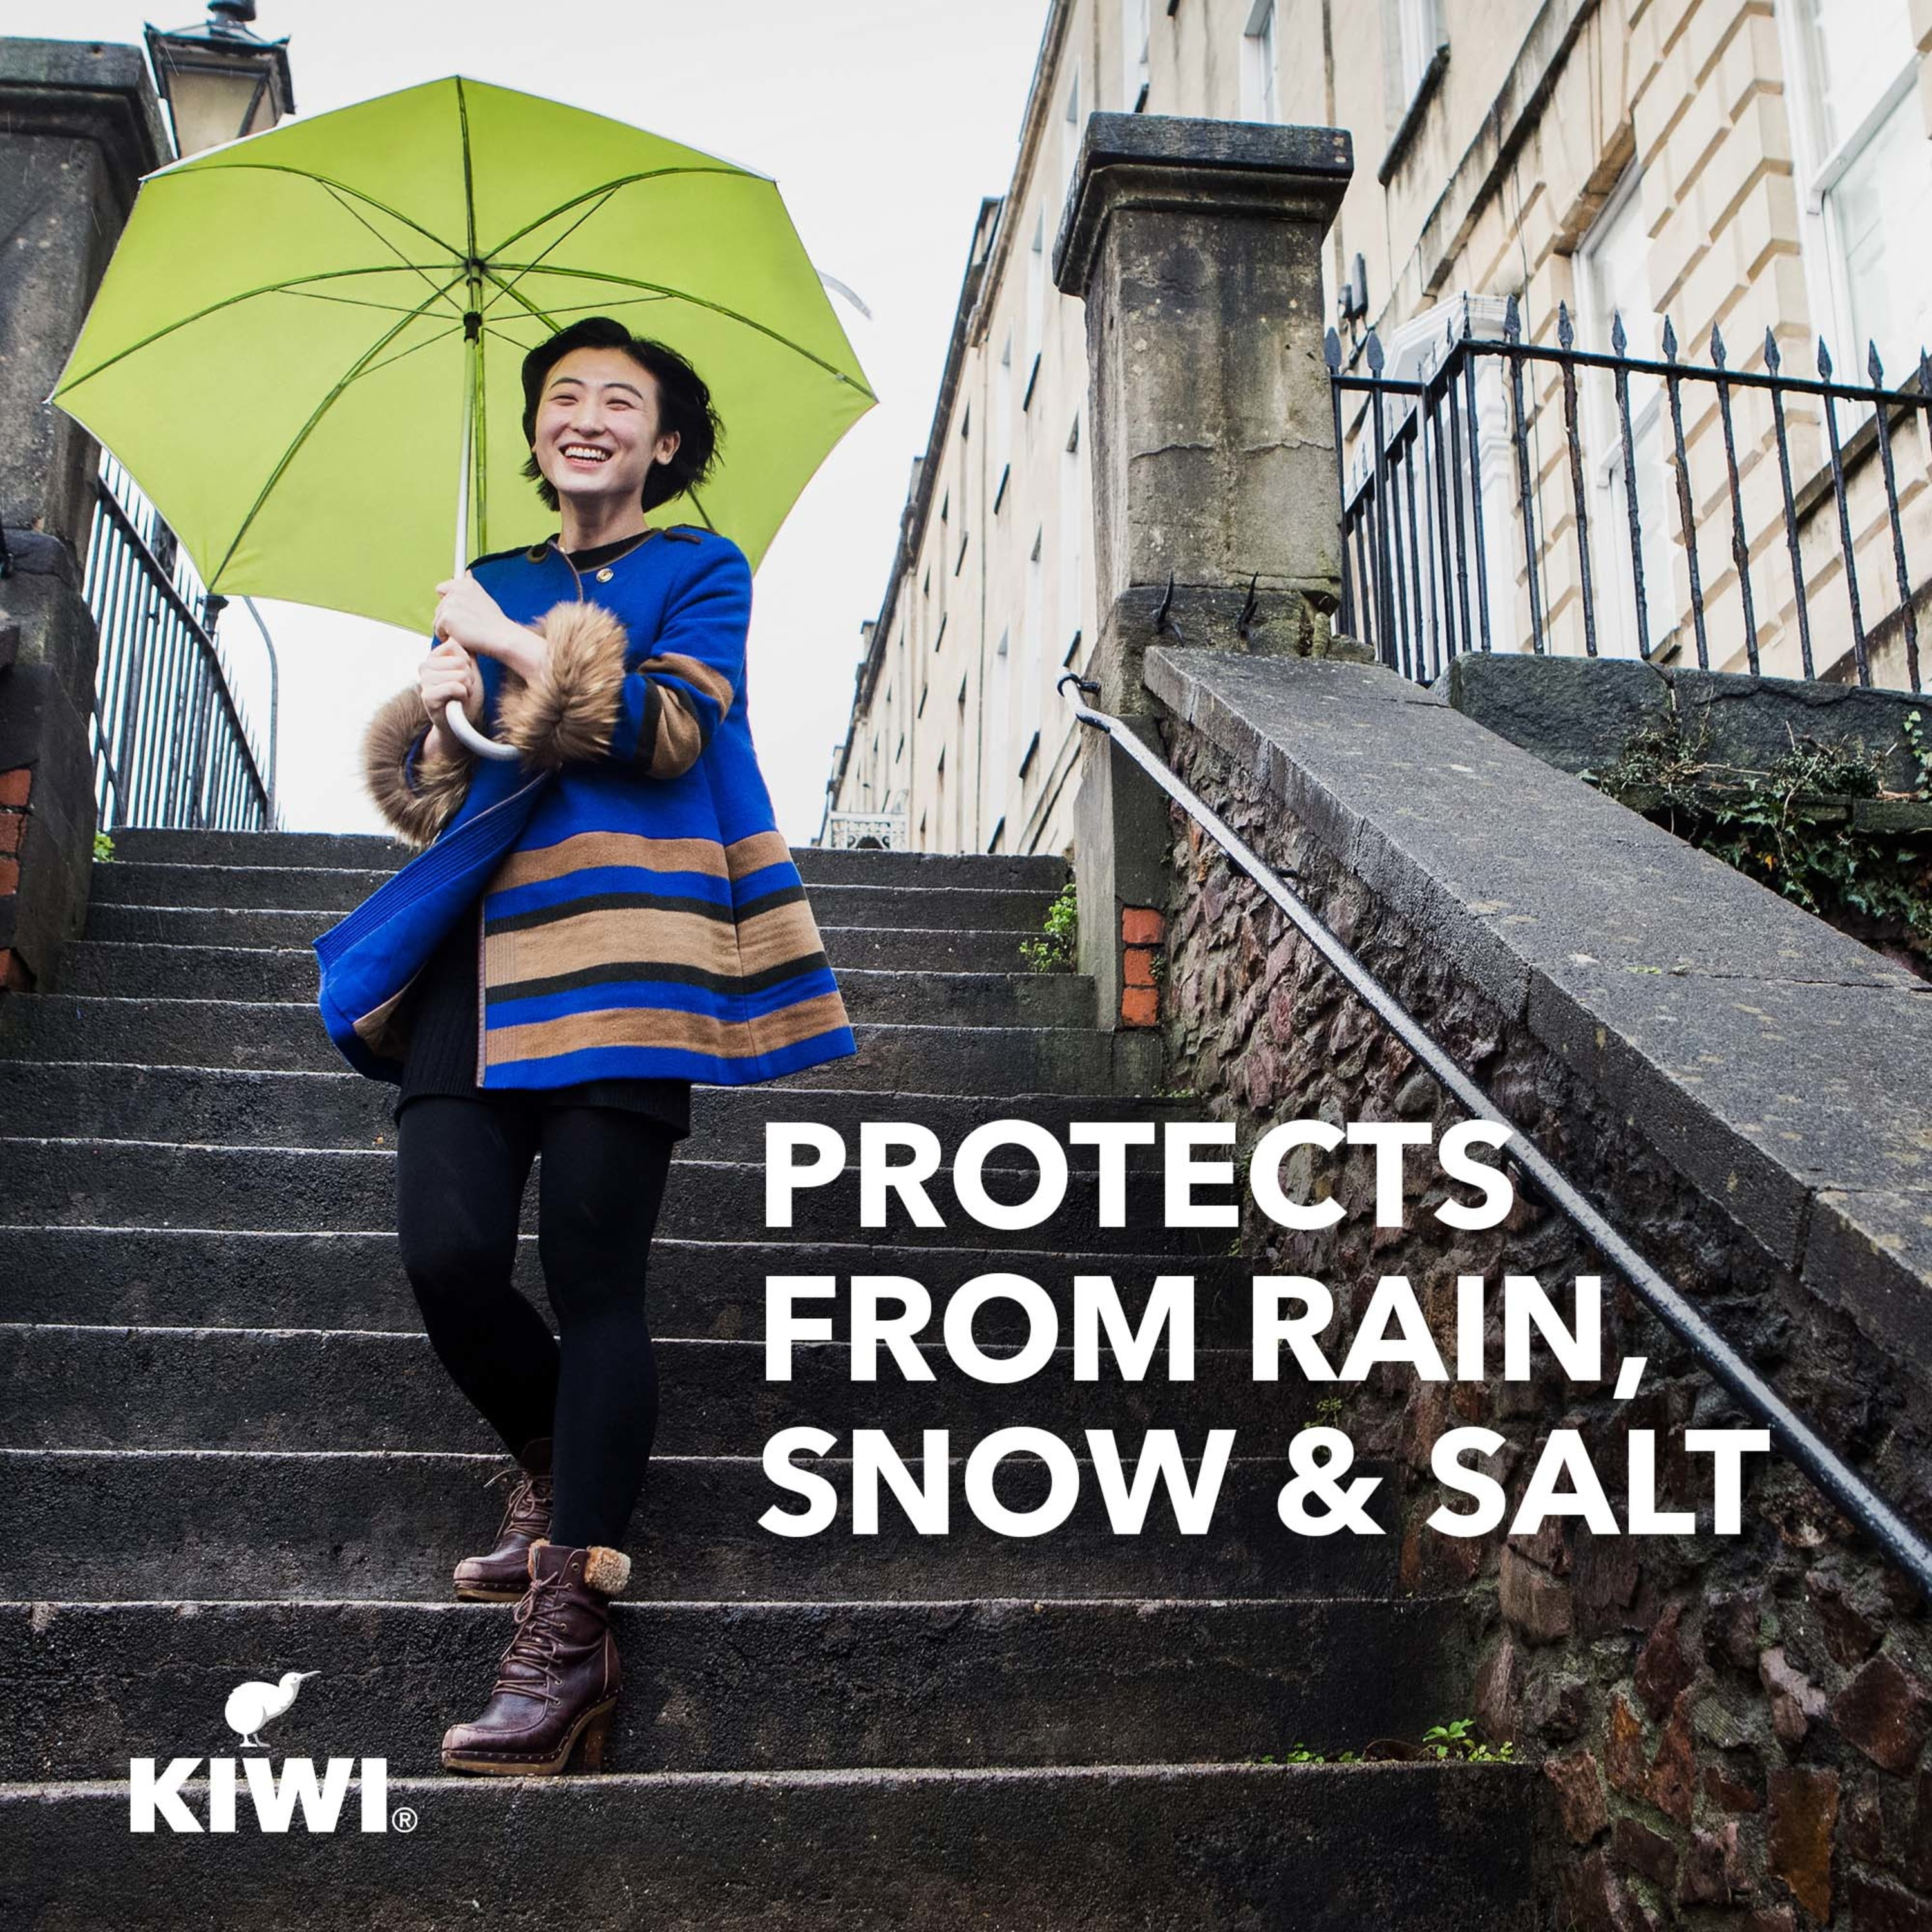 KIWI Protect-All Waterproofer Spray, Water Repellant for Shoes